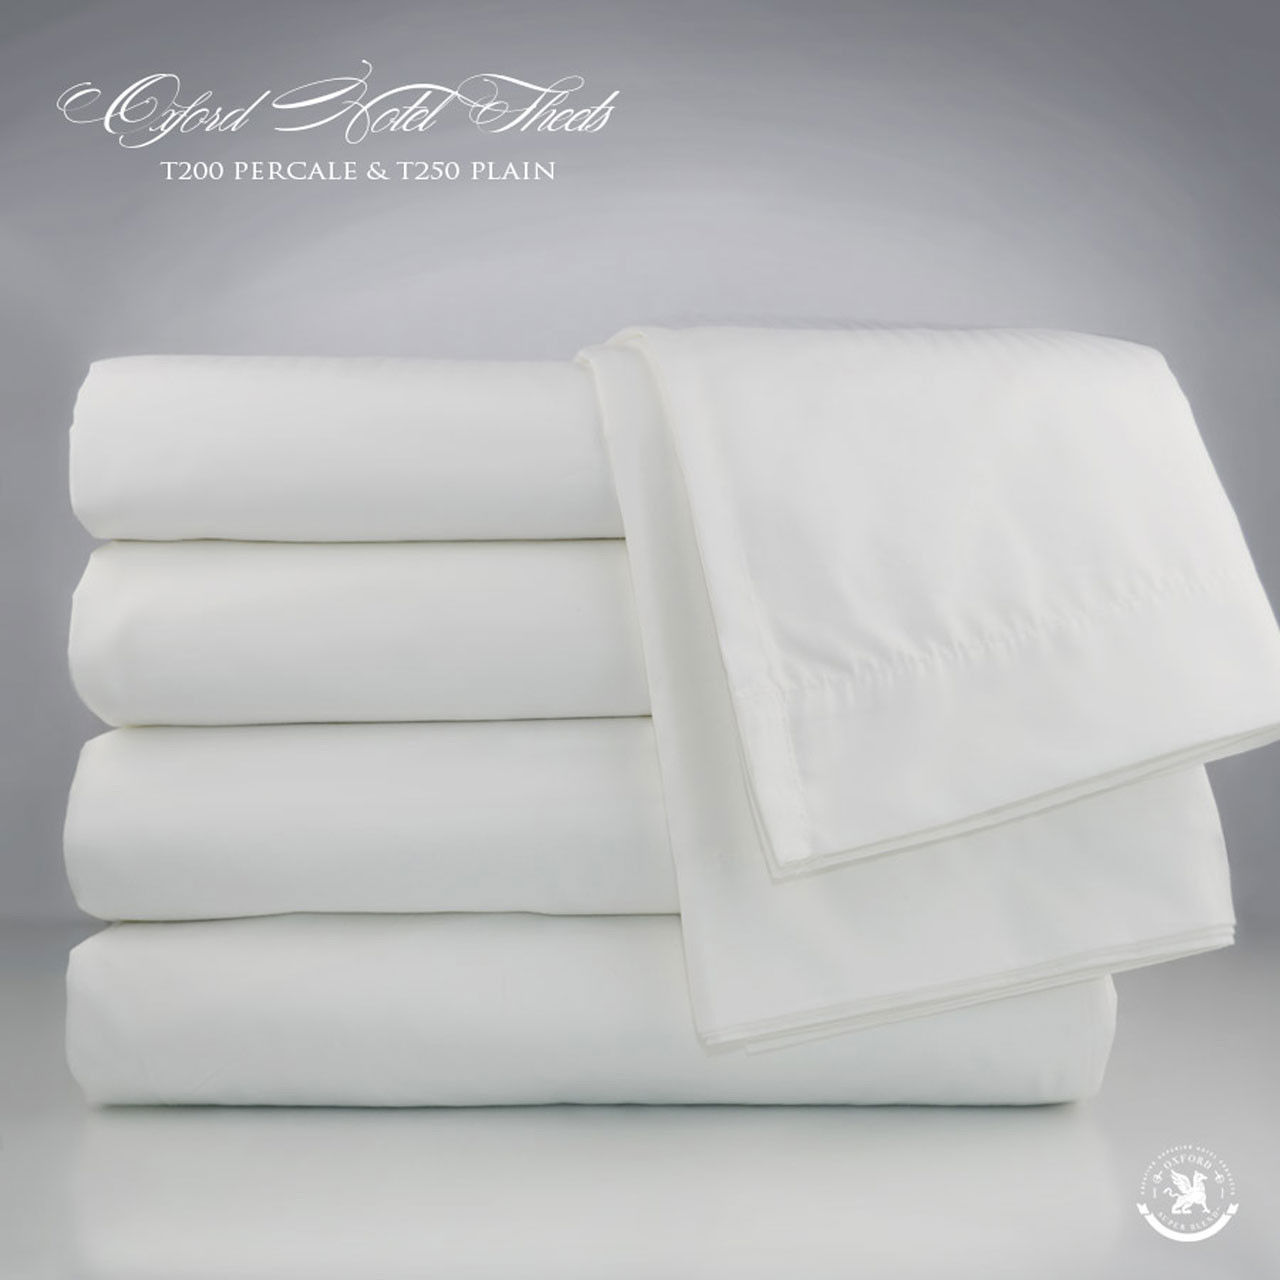 What method identifies the Oxford Super Blend Sheets from T-200 laundry easily?